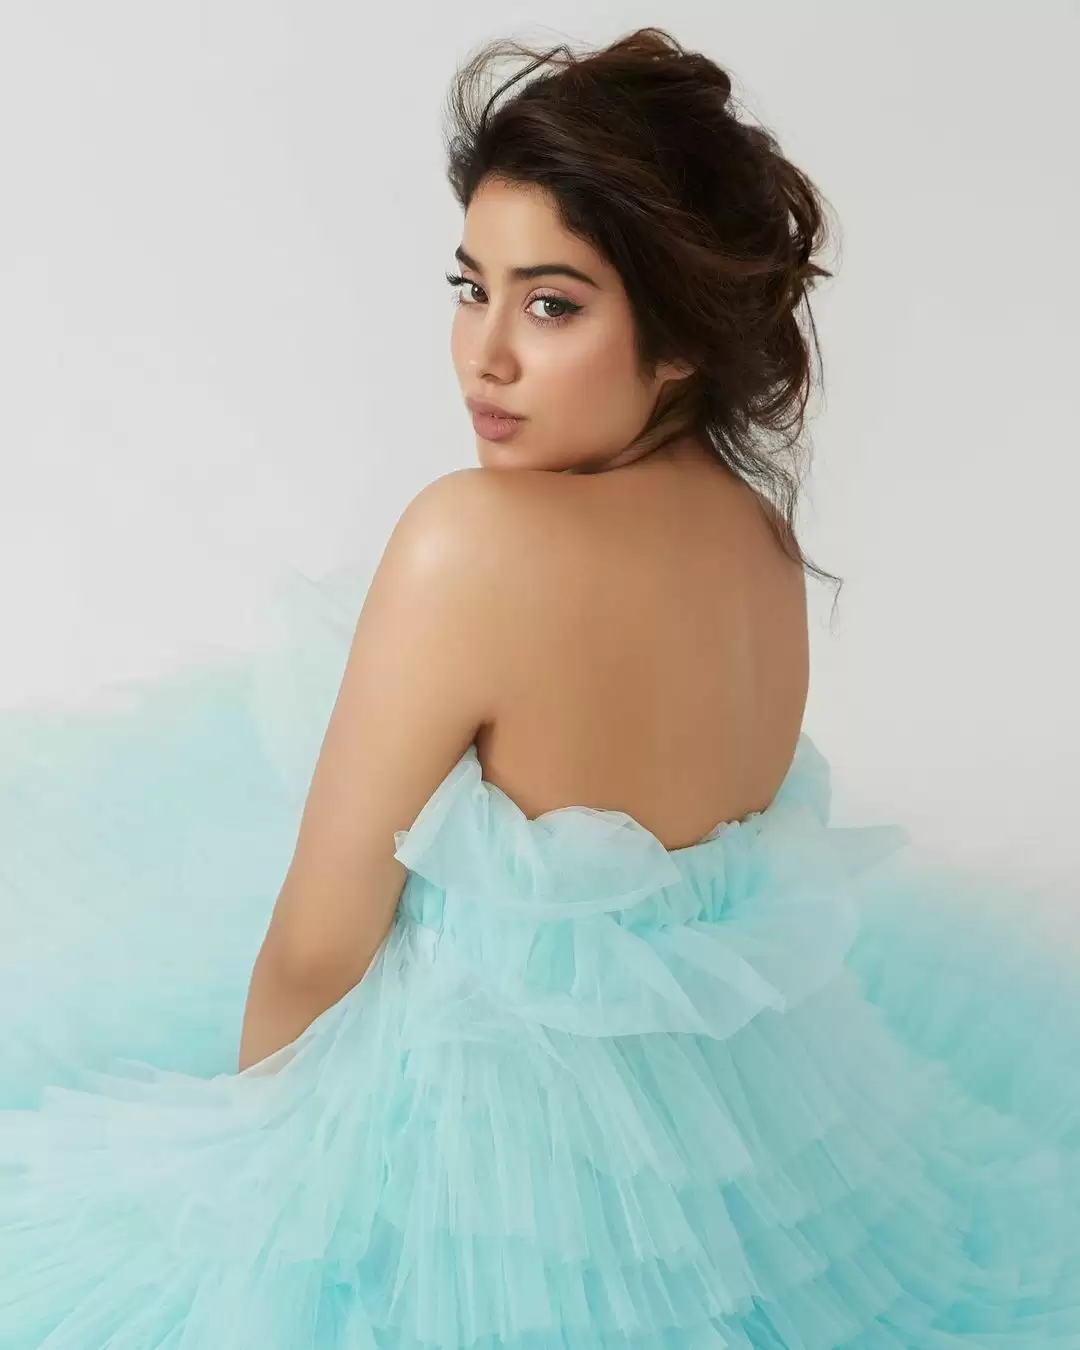 Janhvi Kapoor’s jaw-dropping looks will leave you asking for more!